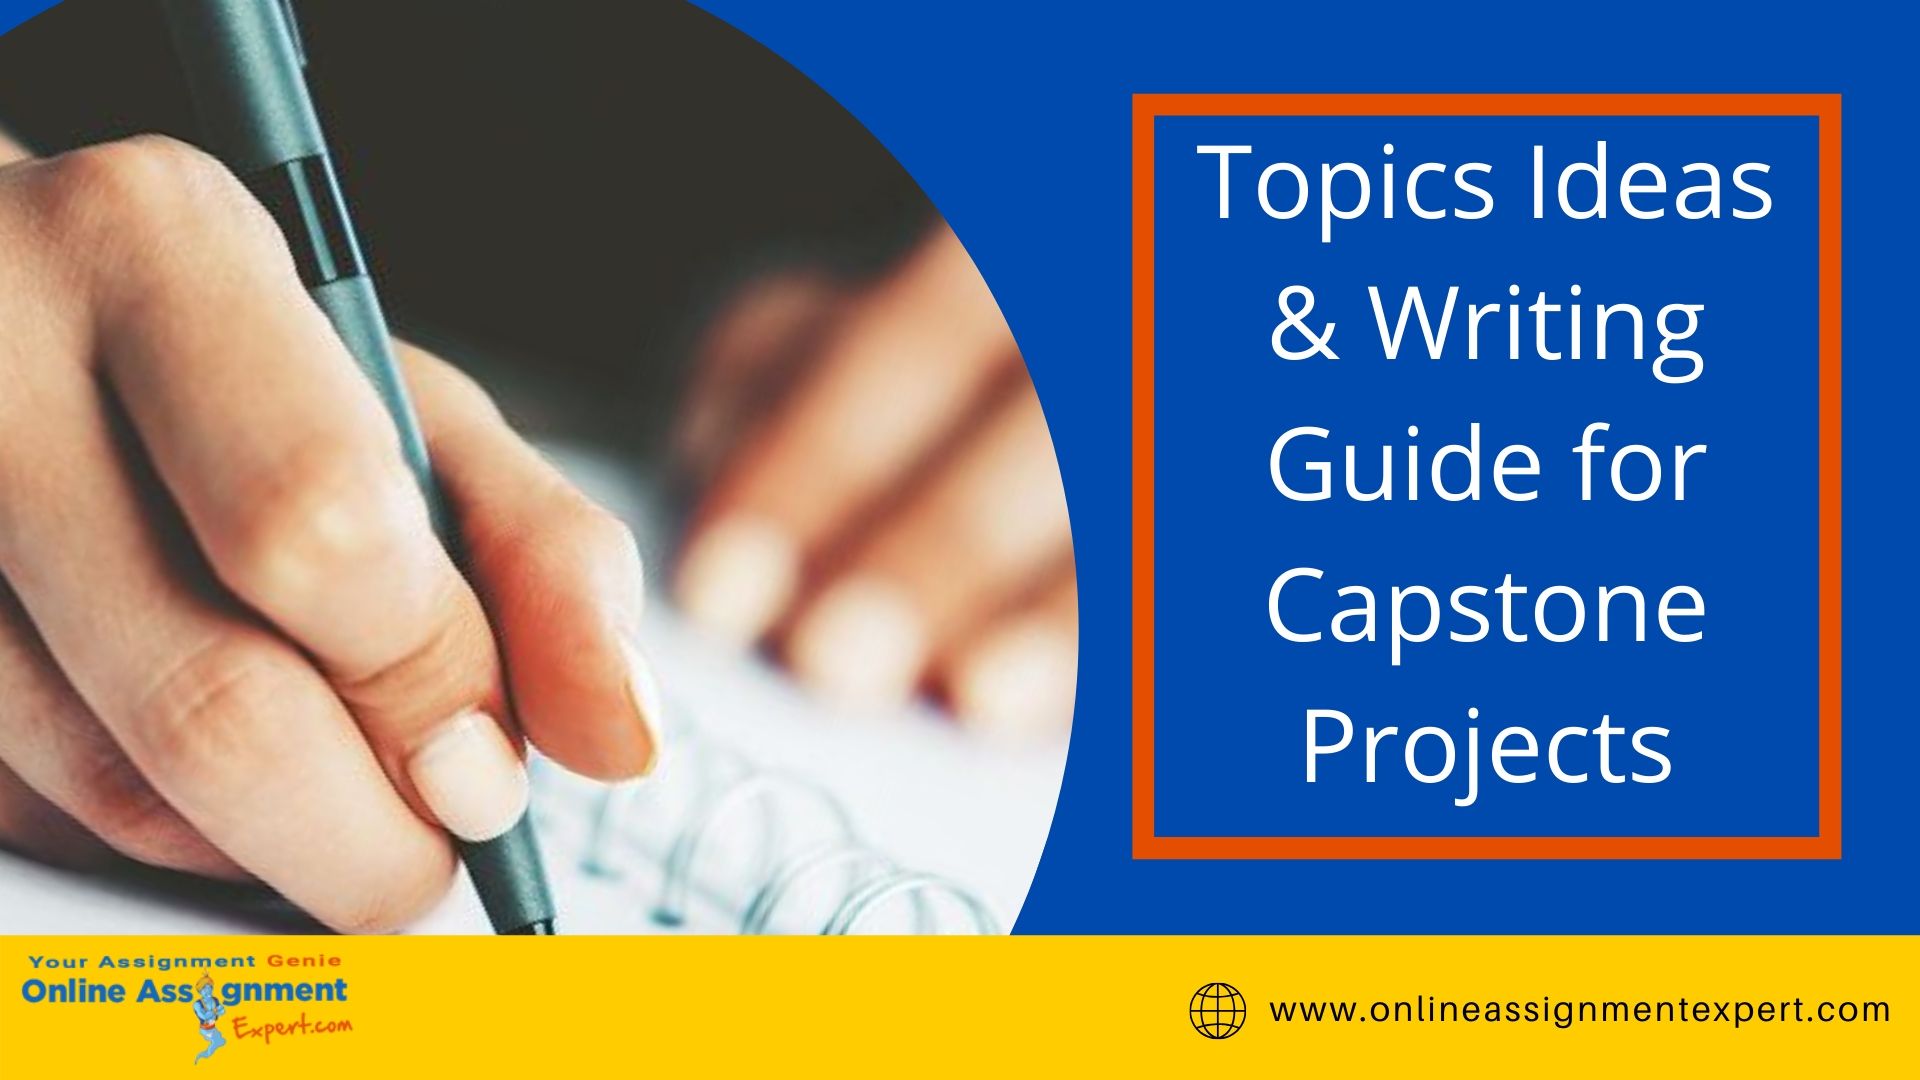 How to write A+ Capstone Project: Topics Ideas & Writing Guide